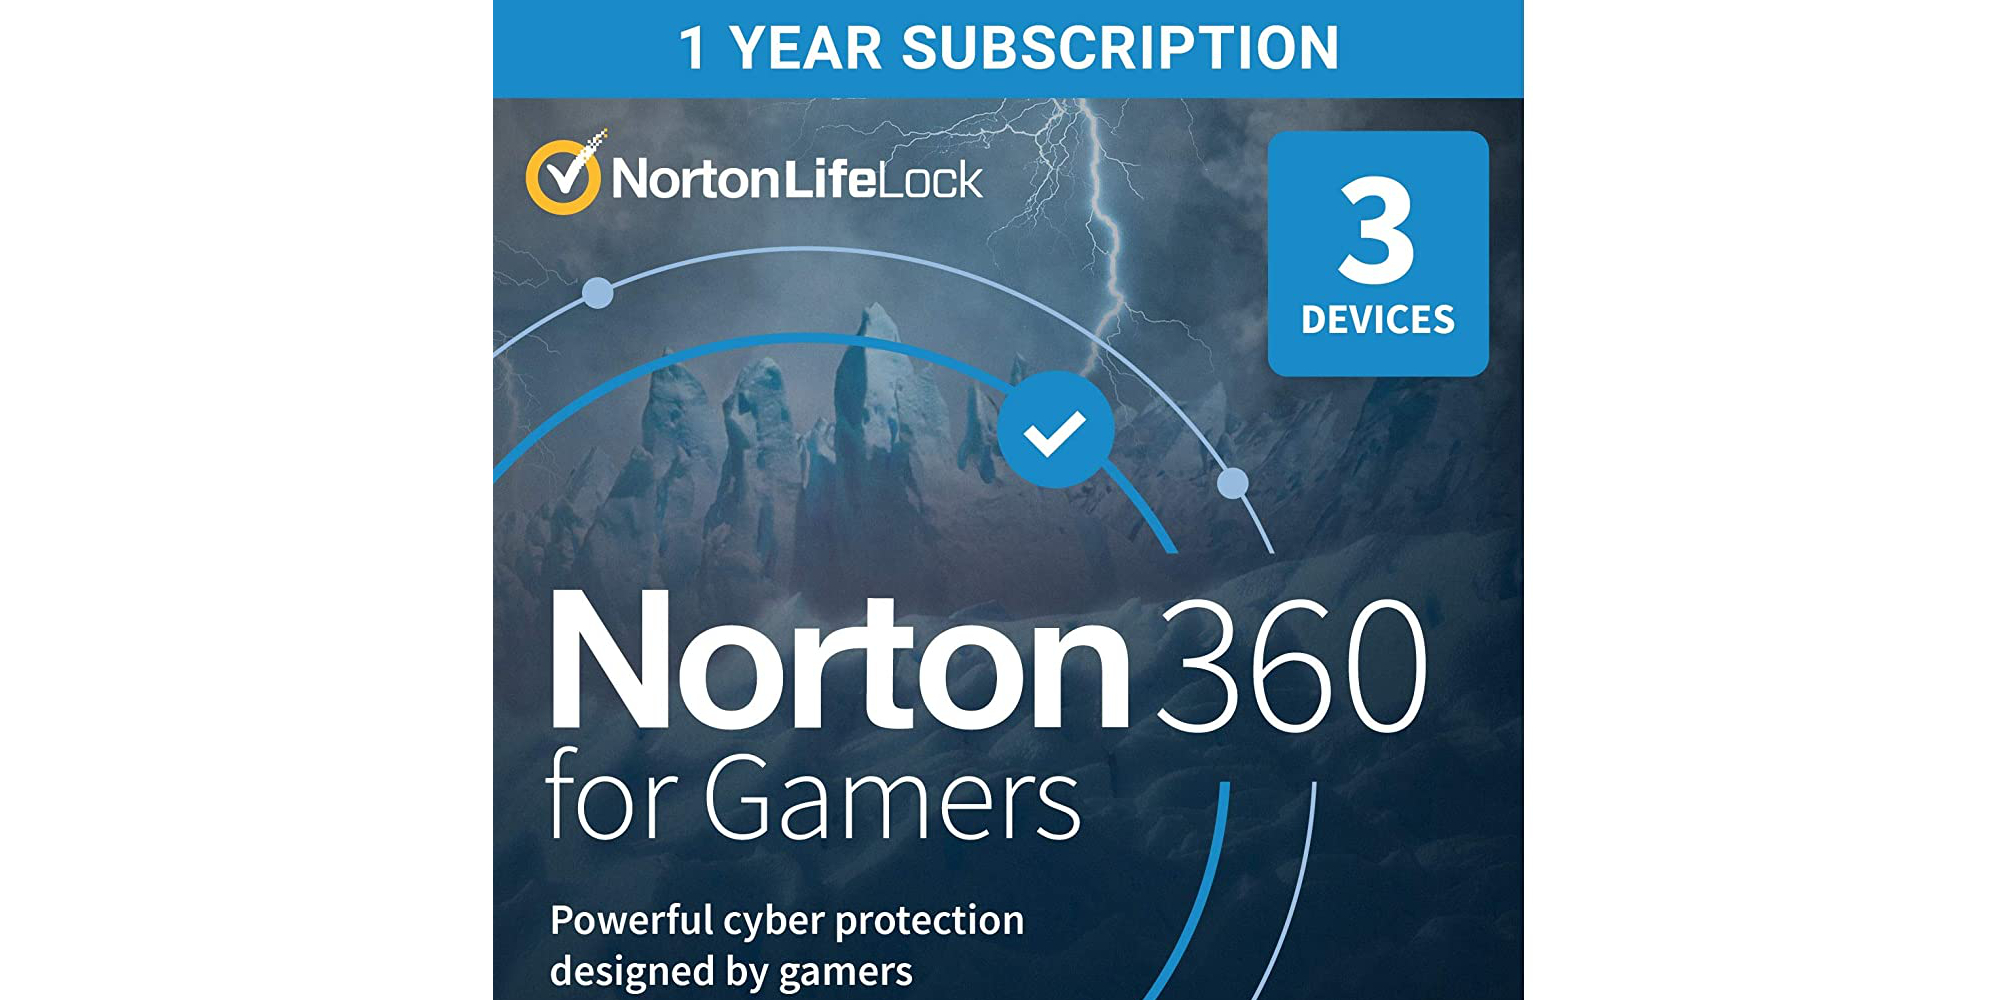 norton 360 for gamers